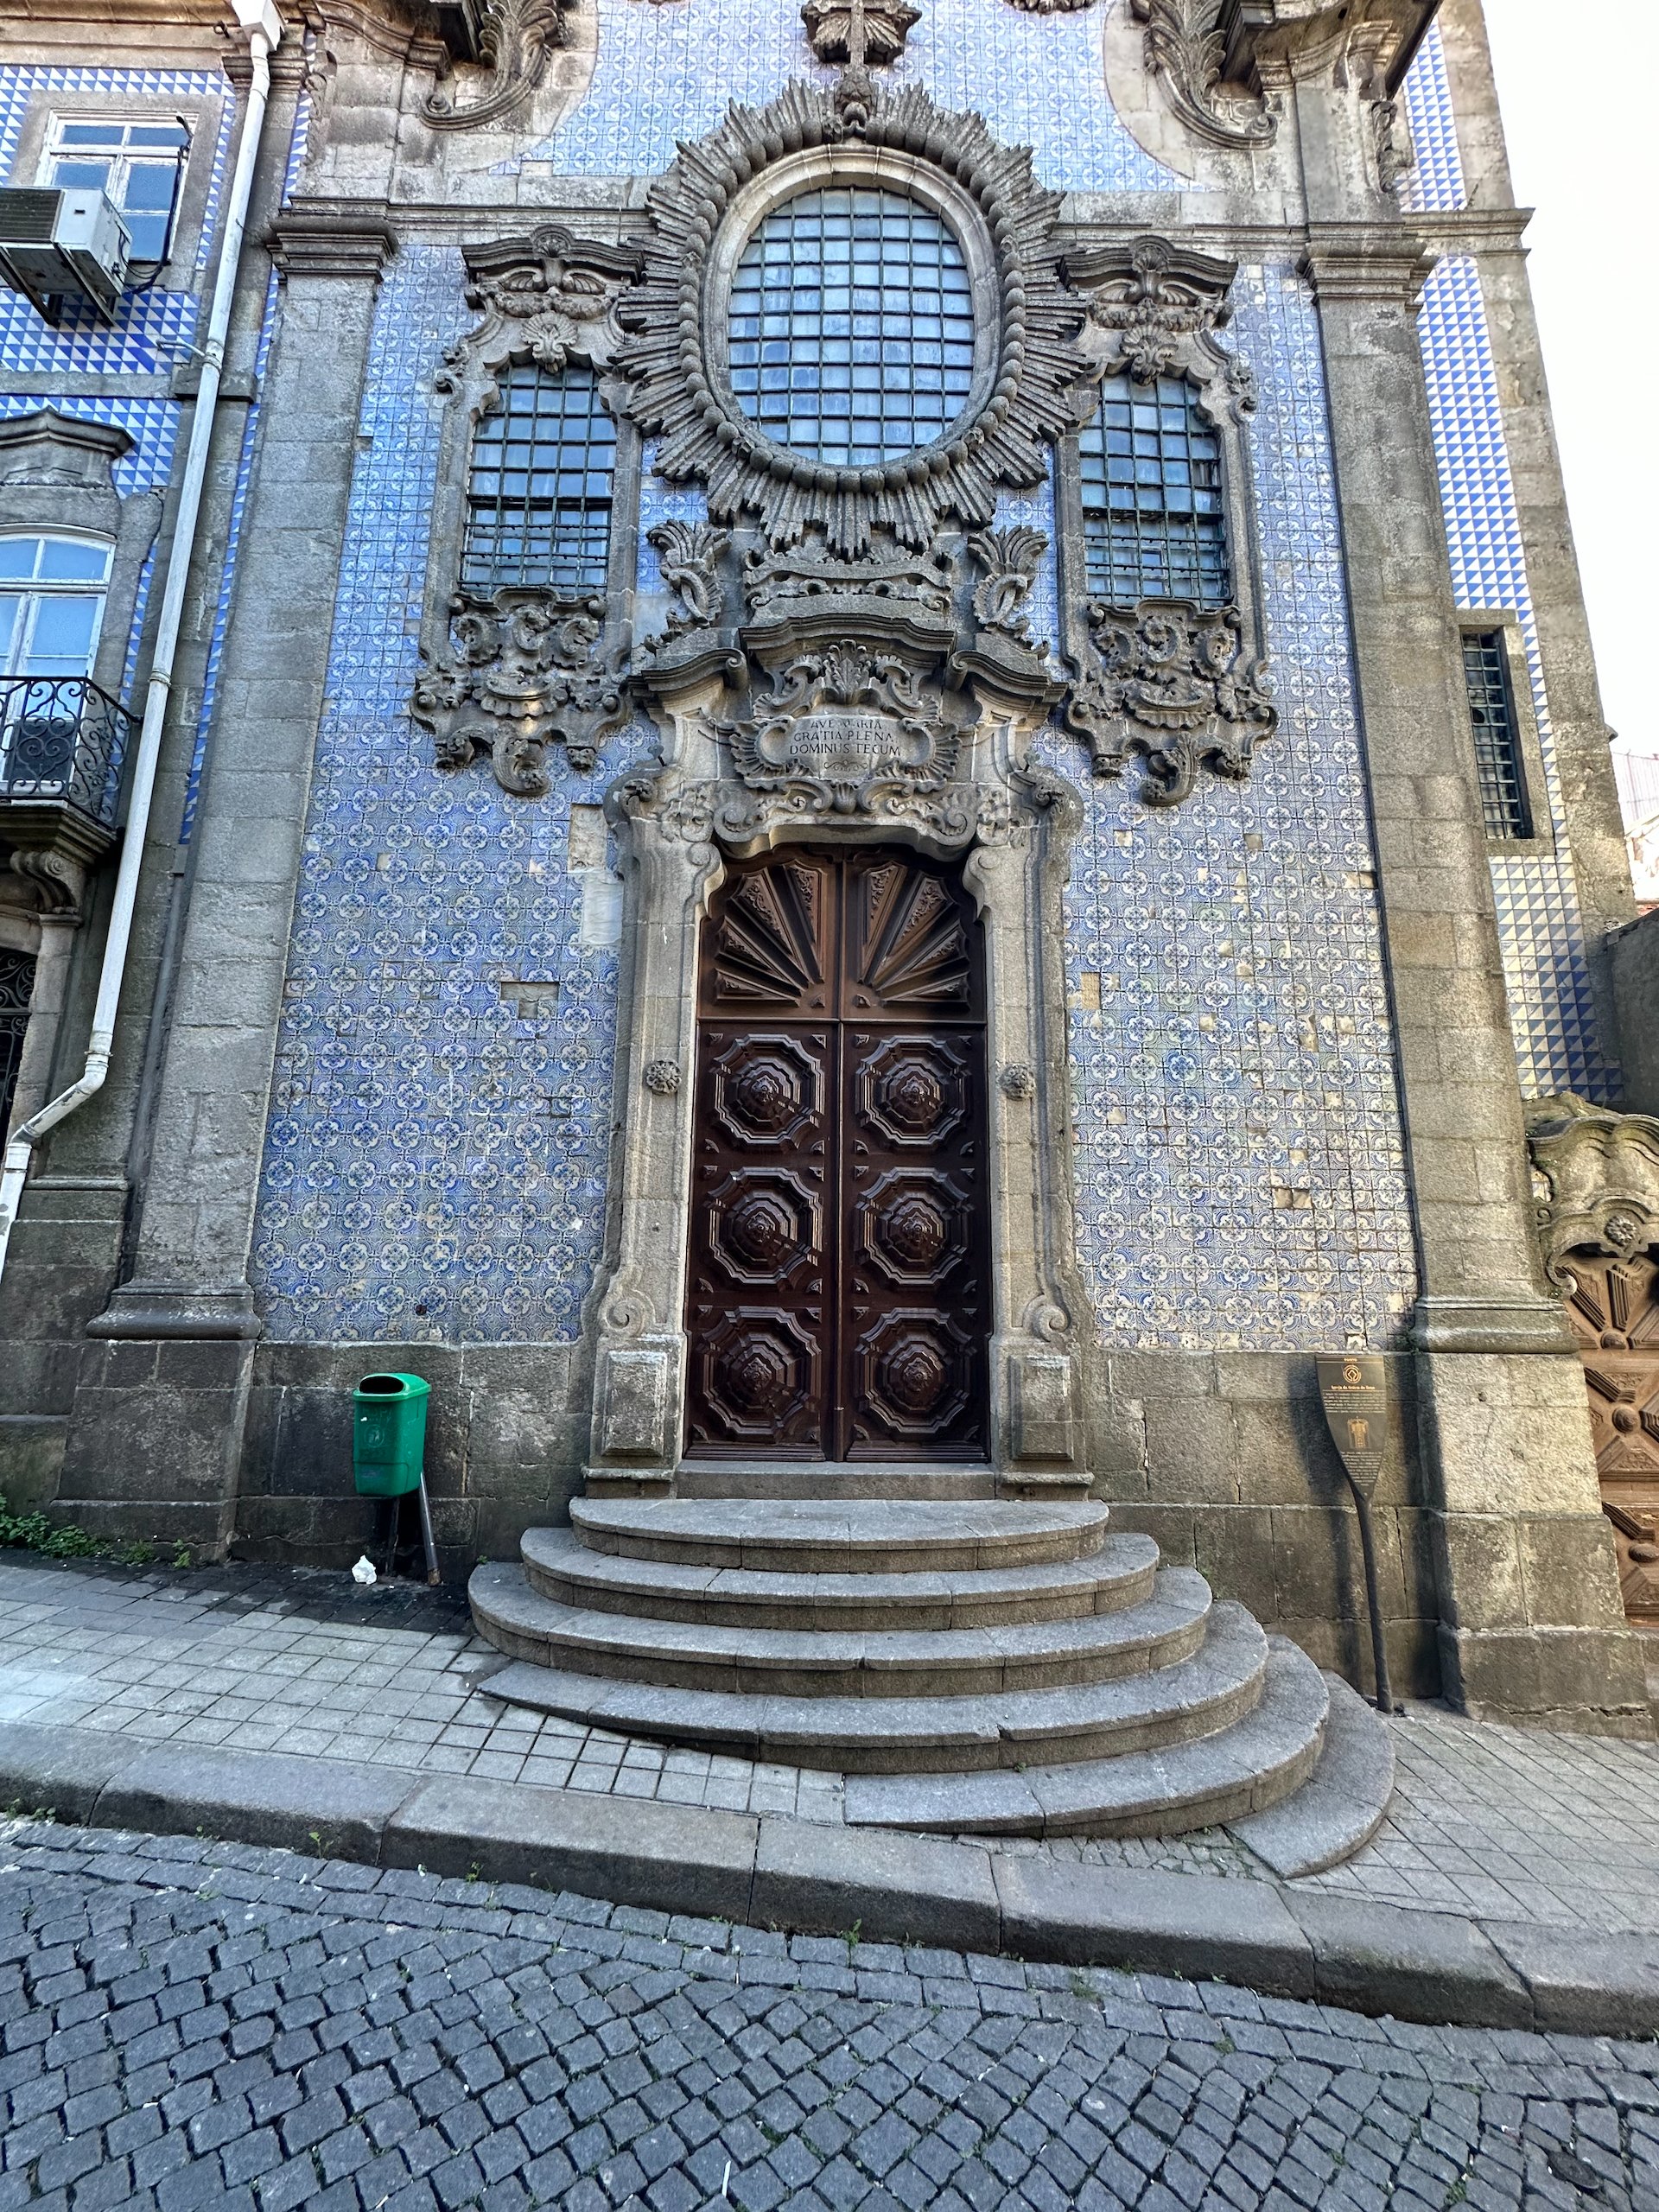  Like many of the building in Portugal, this one was covered in amazing tile work.  